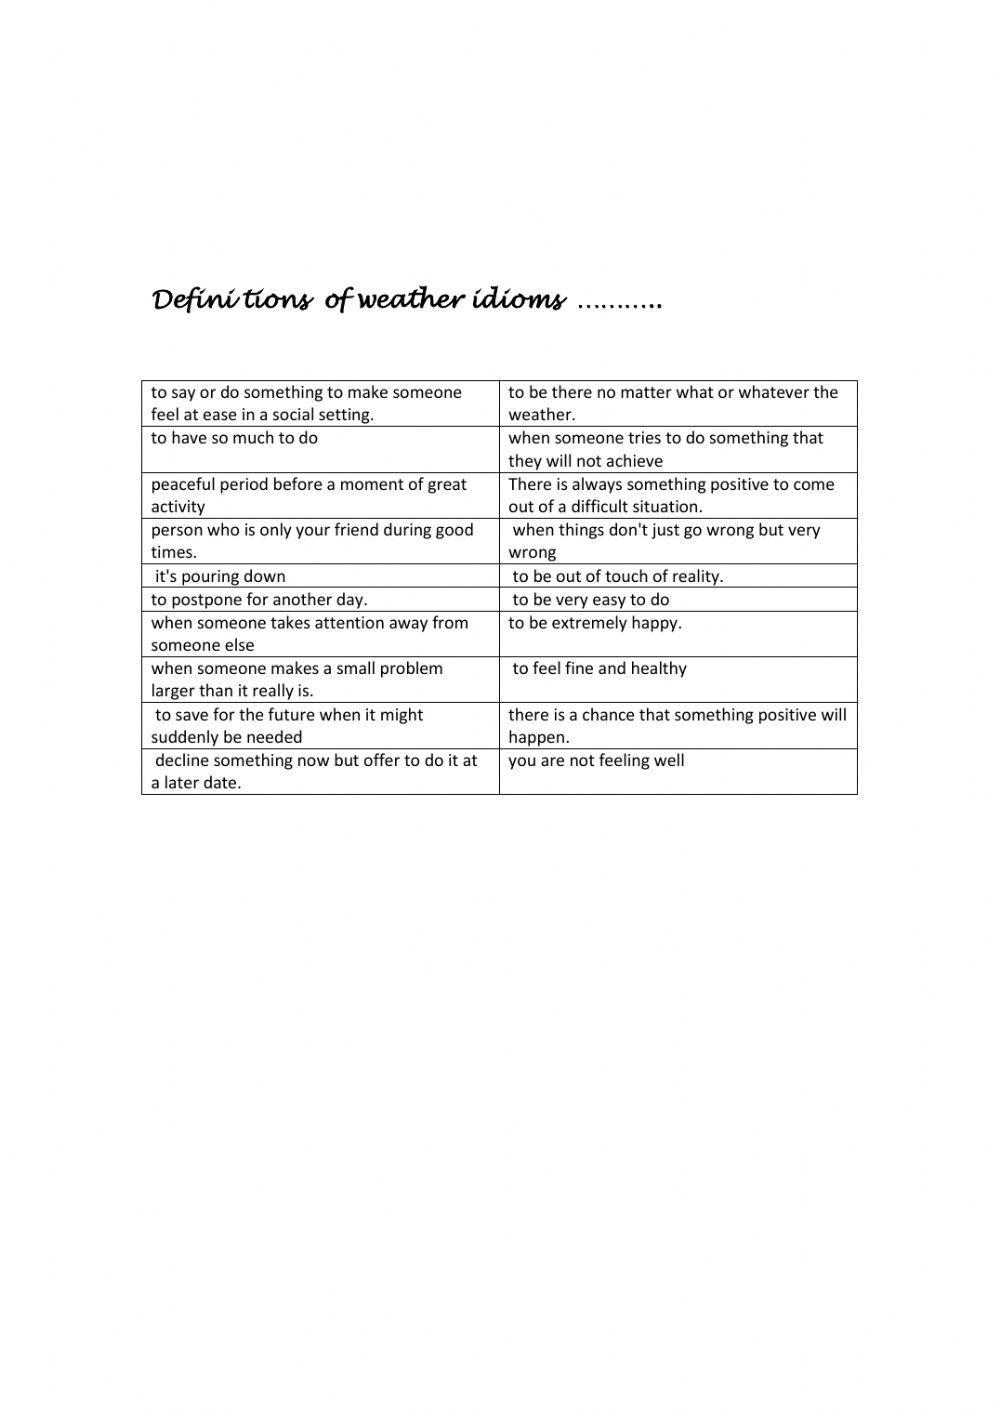 Weather Idioms